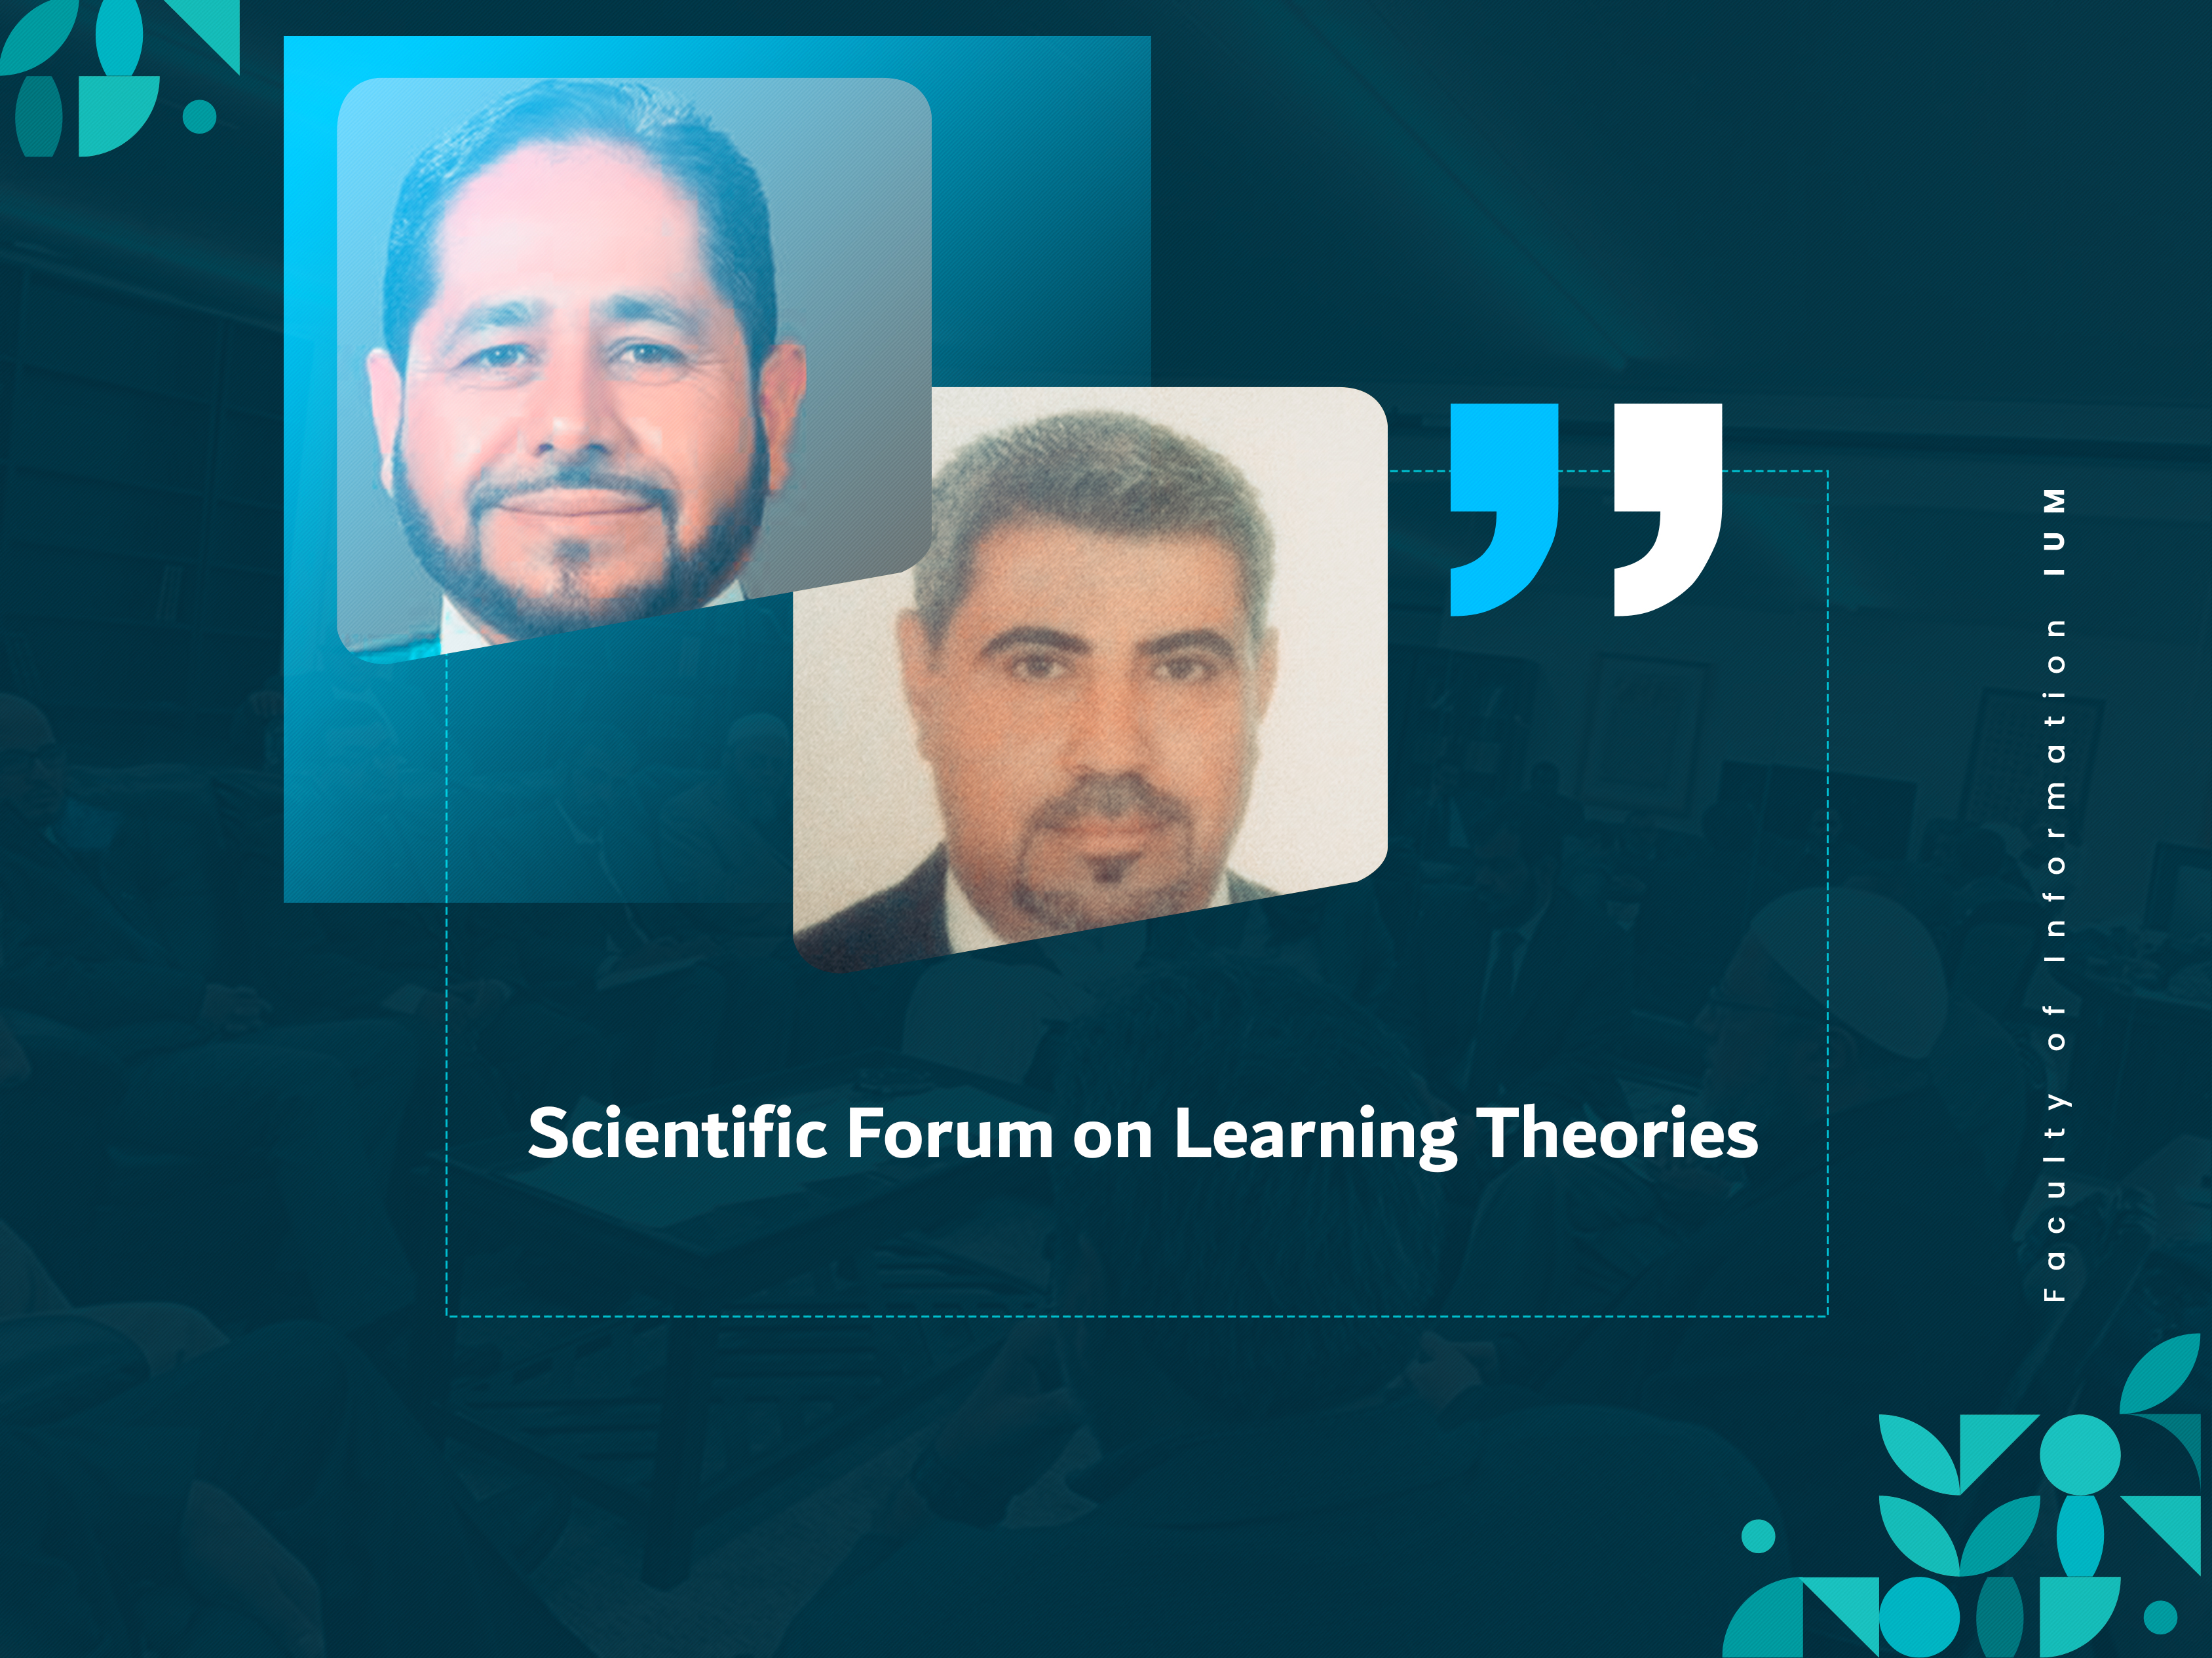 Scientific Forum on Learning Theories